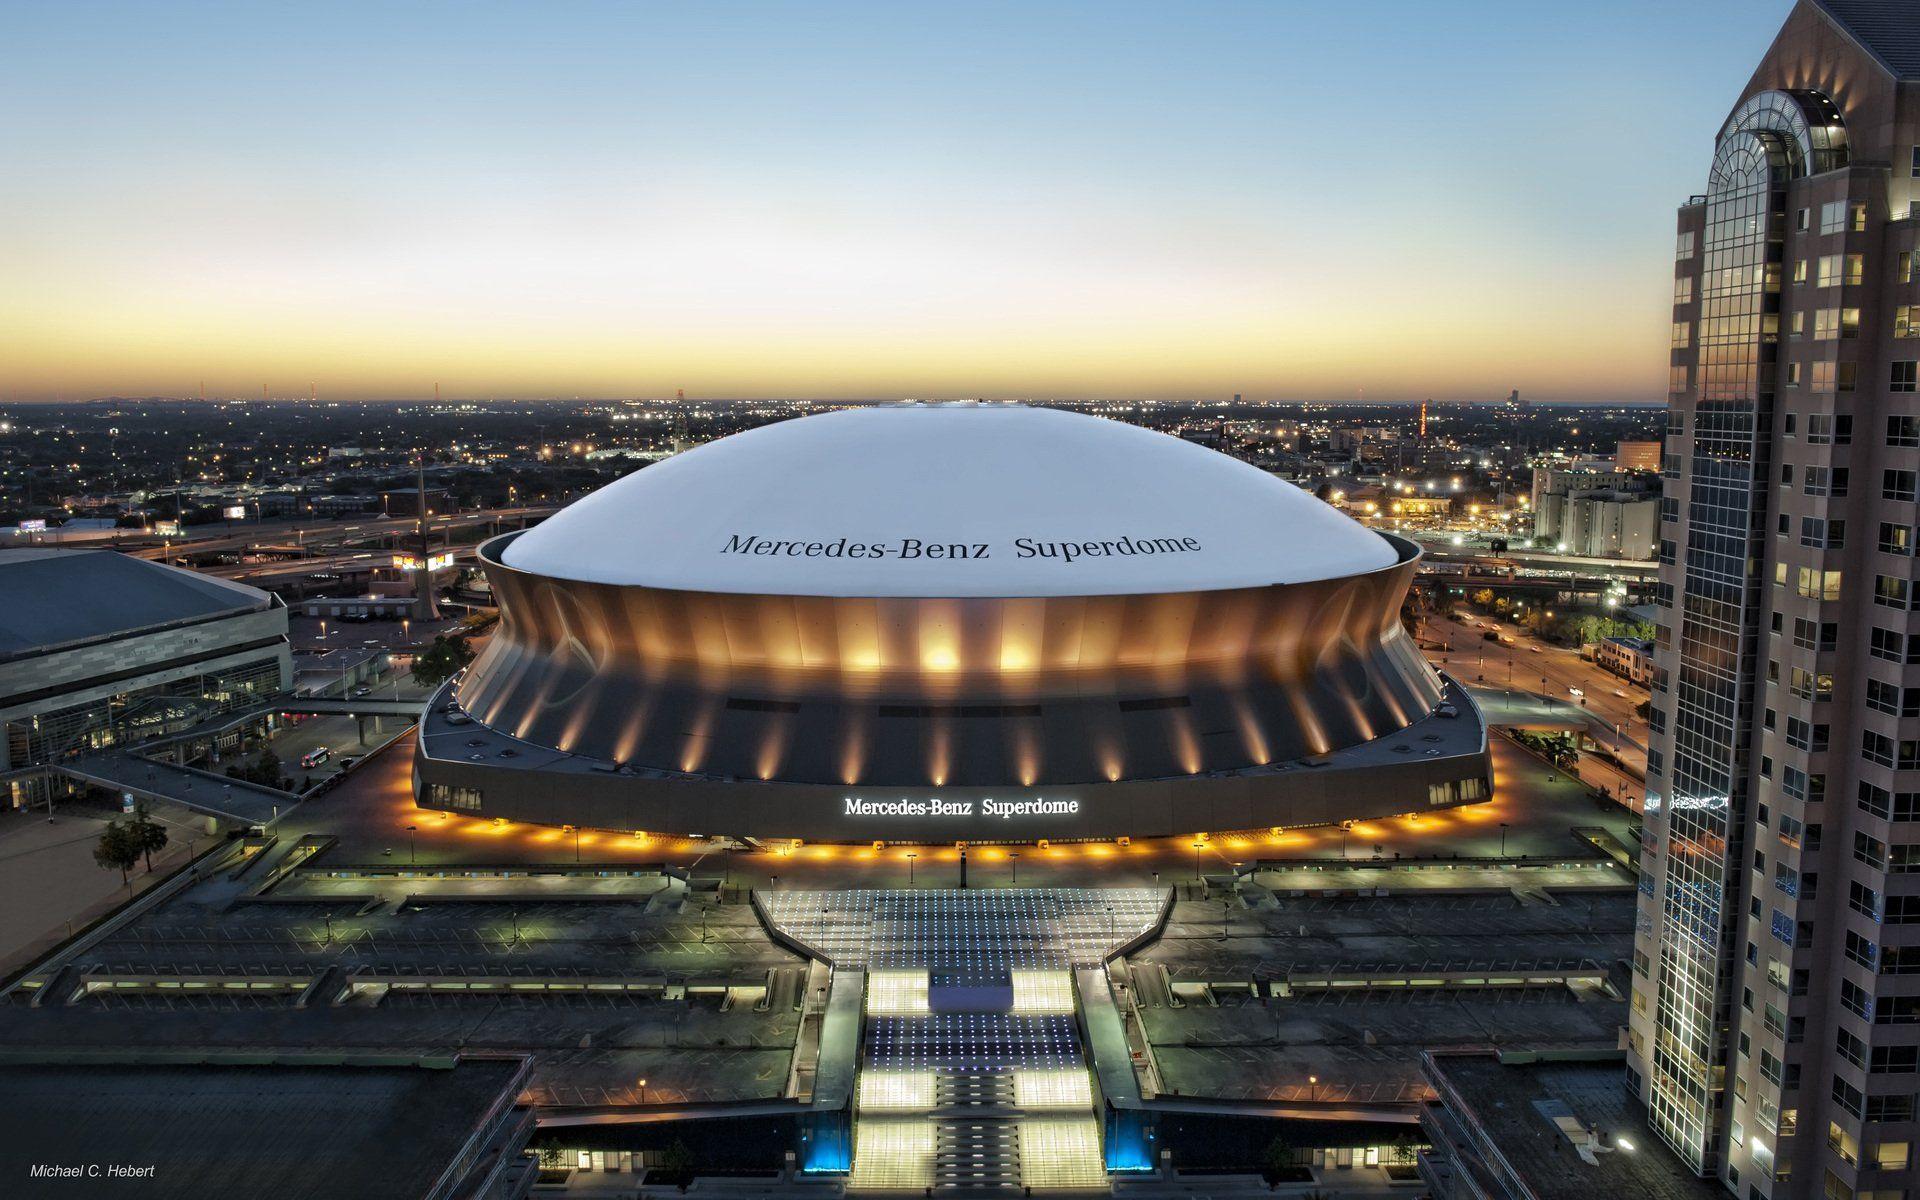 Saints vs Cardinals Tickets, Aug 17 in New Orleans